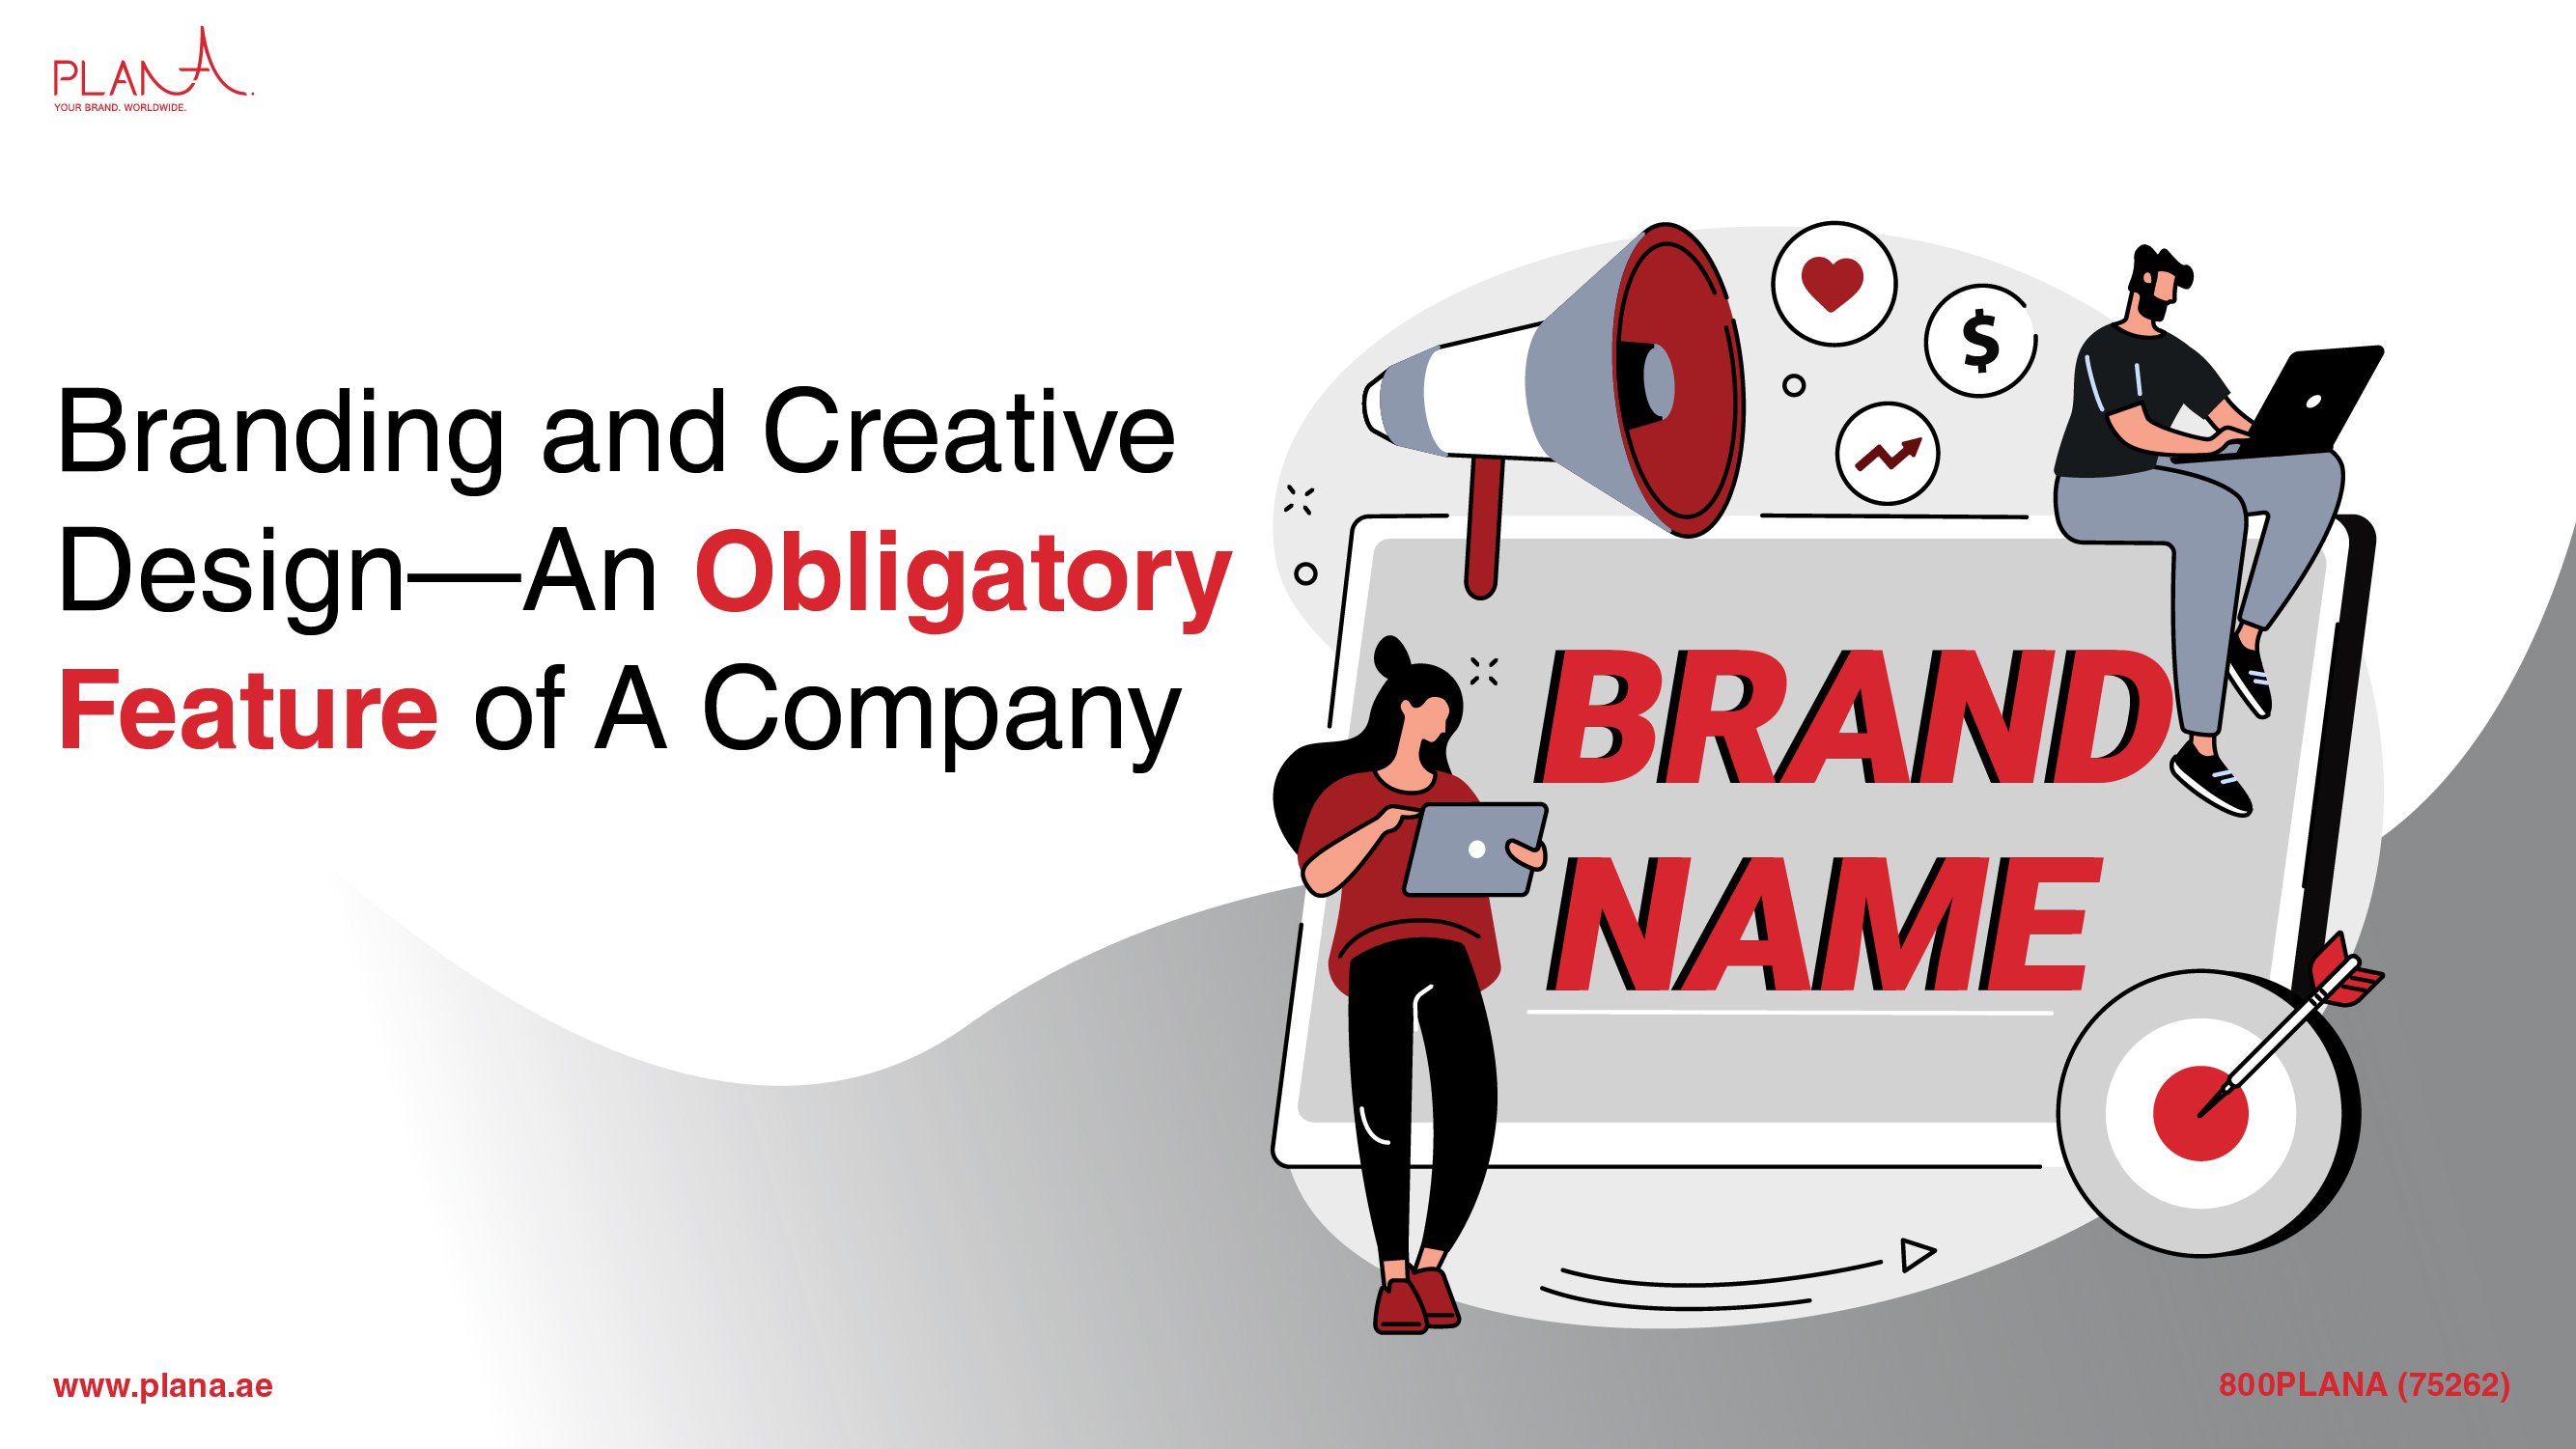 Branding and Creative Design—An Obligatory Feature of a Company